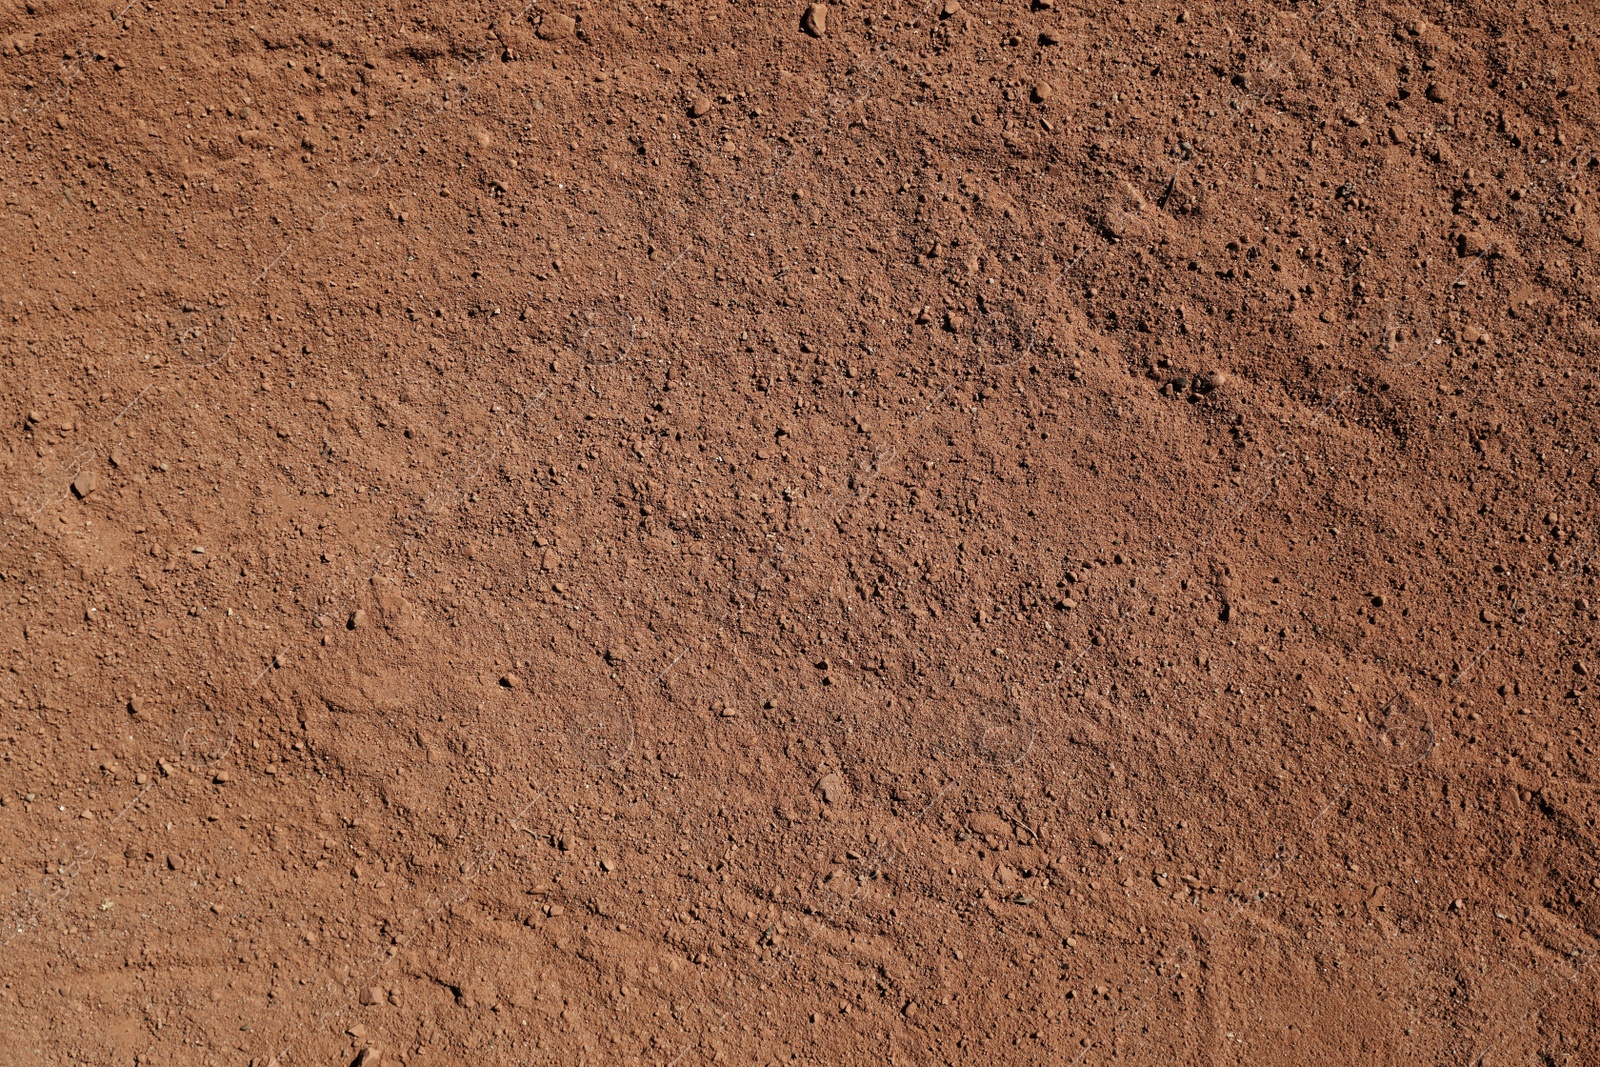 Photo of Textured ground surface as background, top view